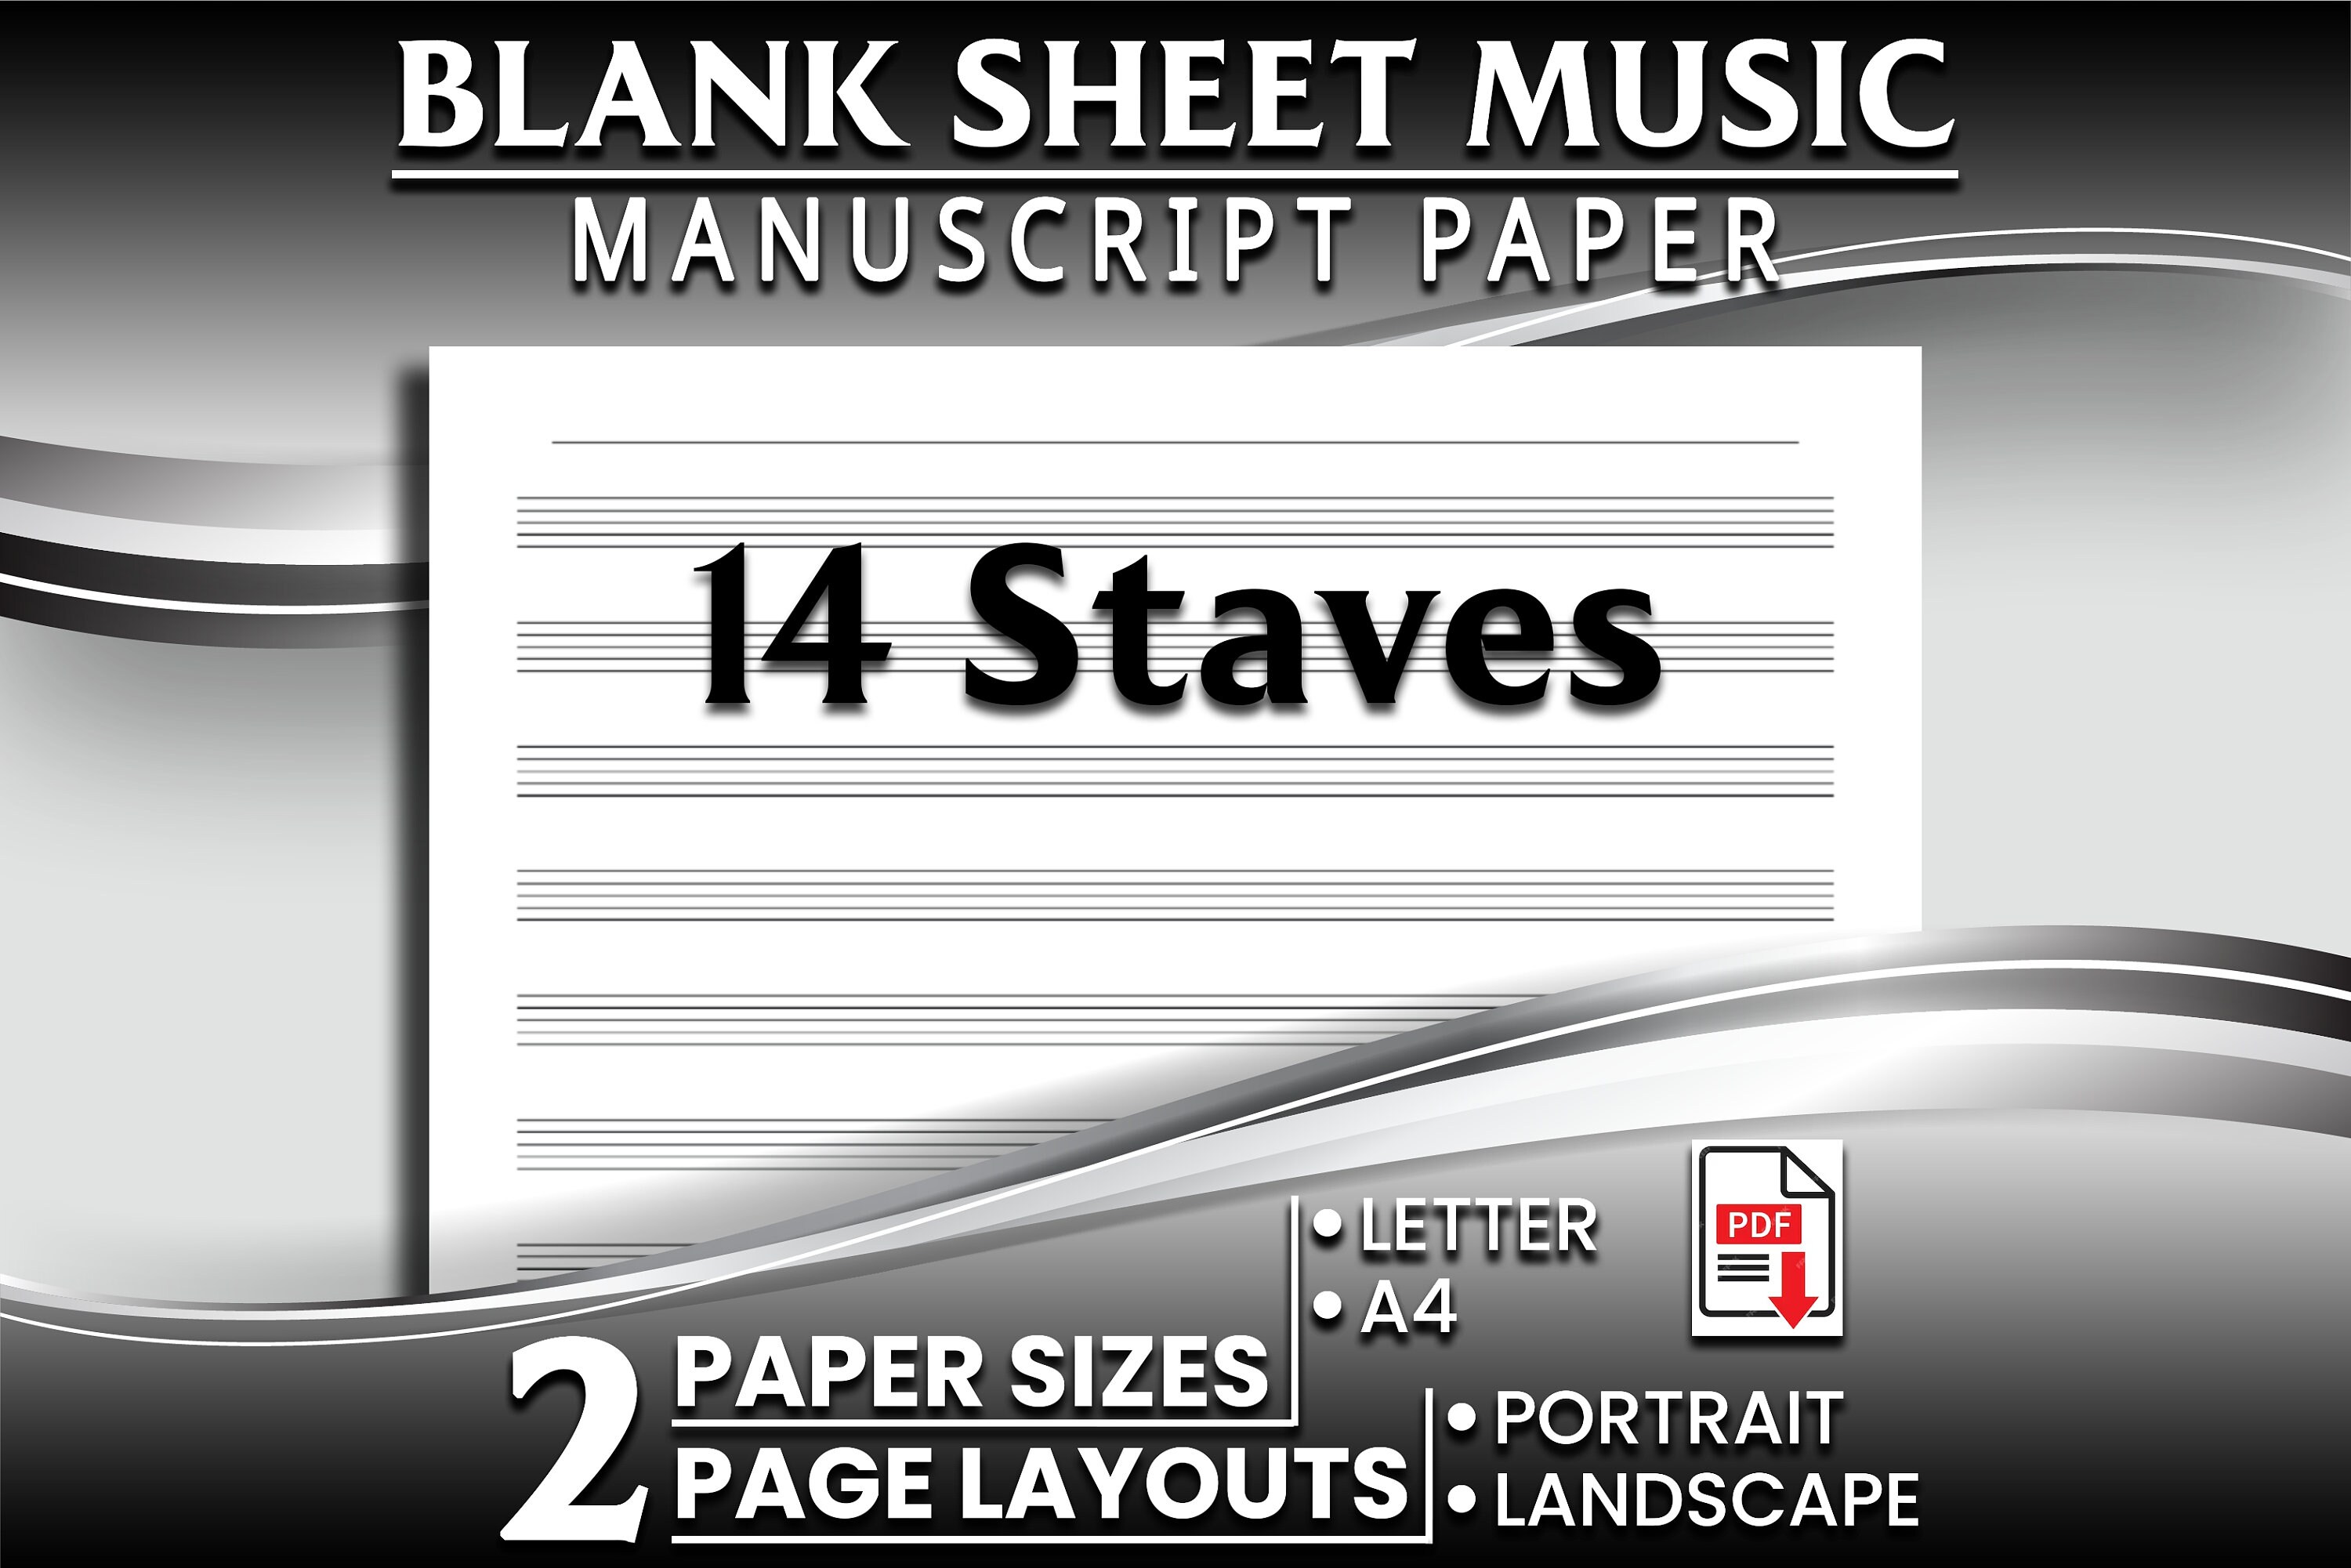 Staff Paper for Duets, sheet music refill